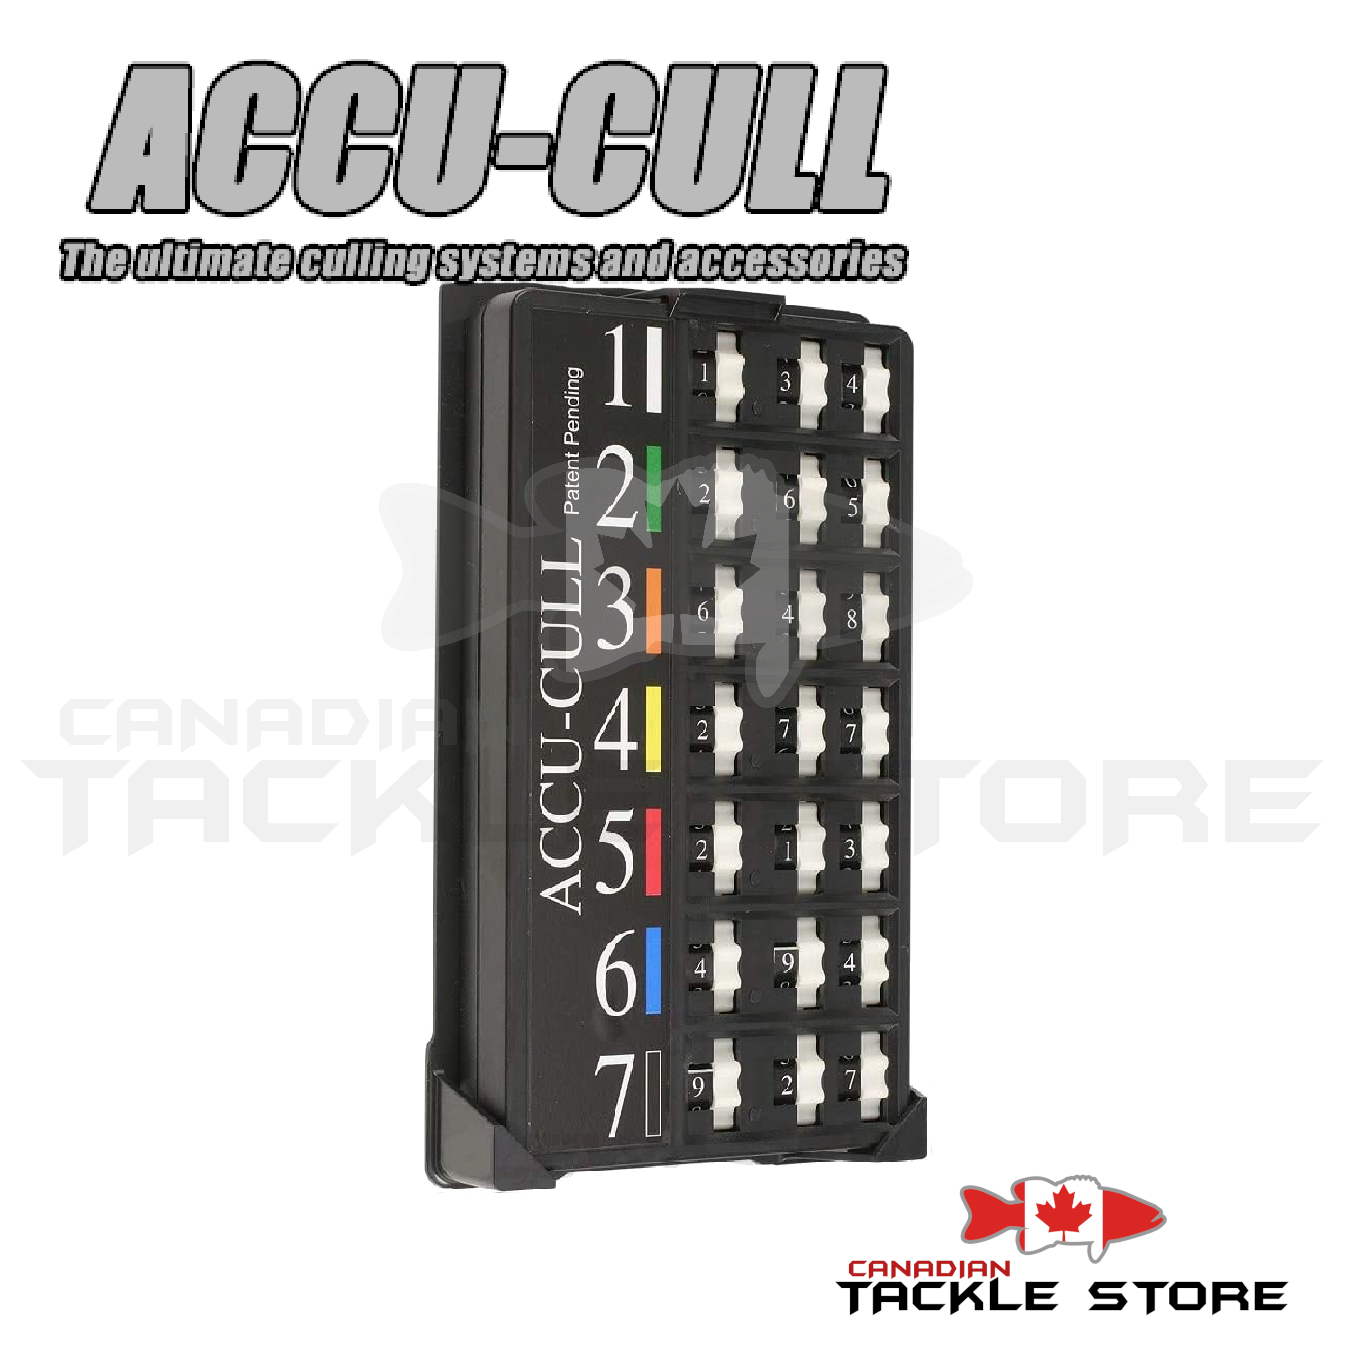 Accu Cull Weight Recorder – Canadian Tackle Store